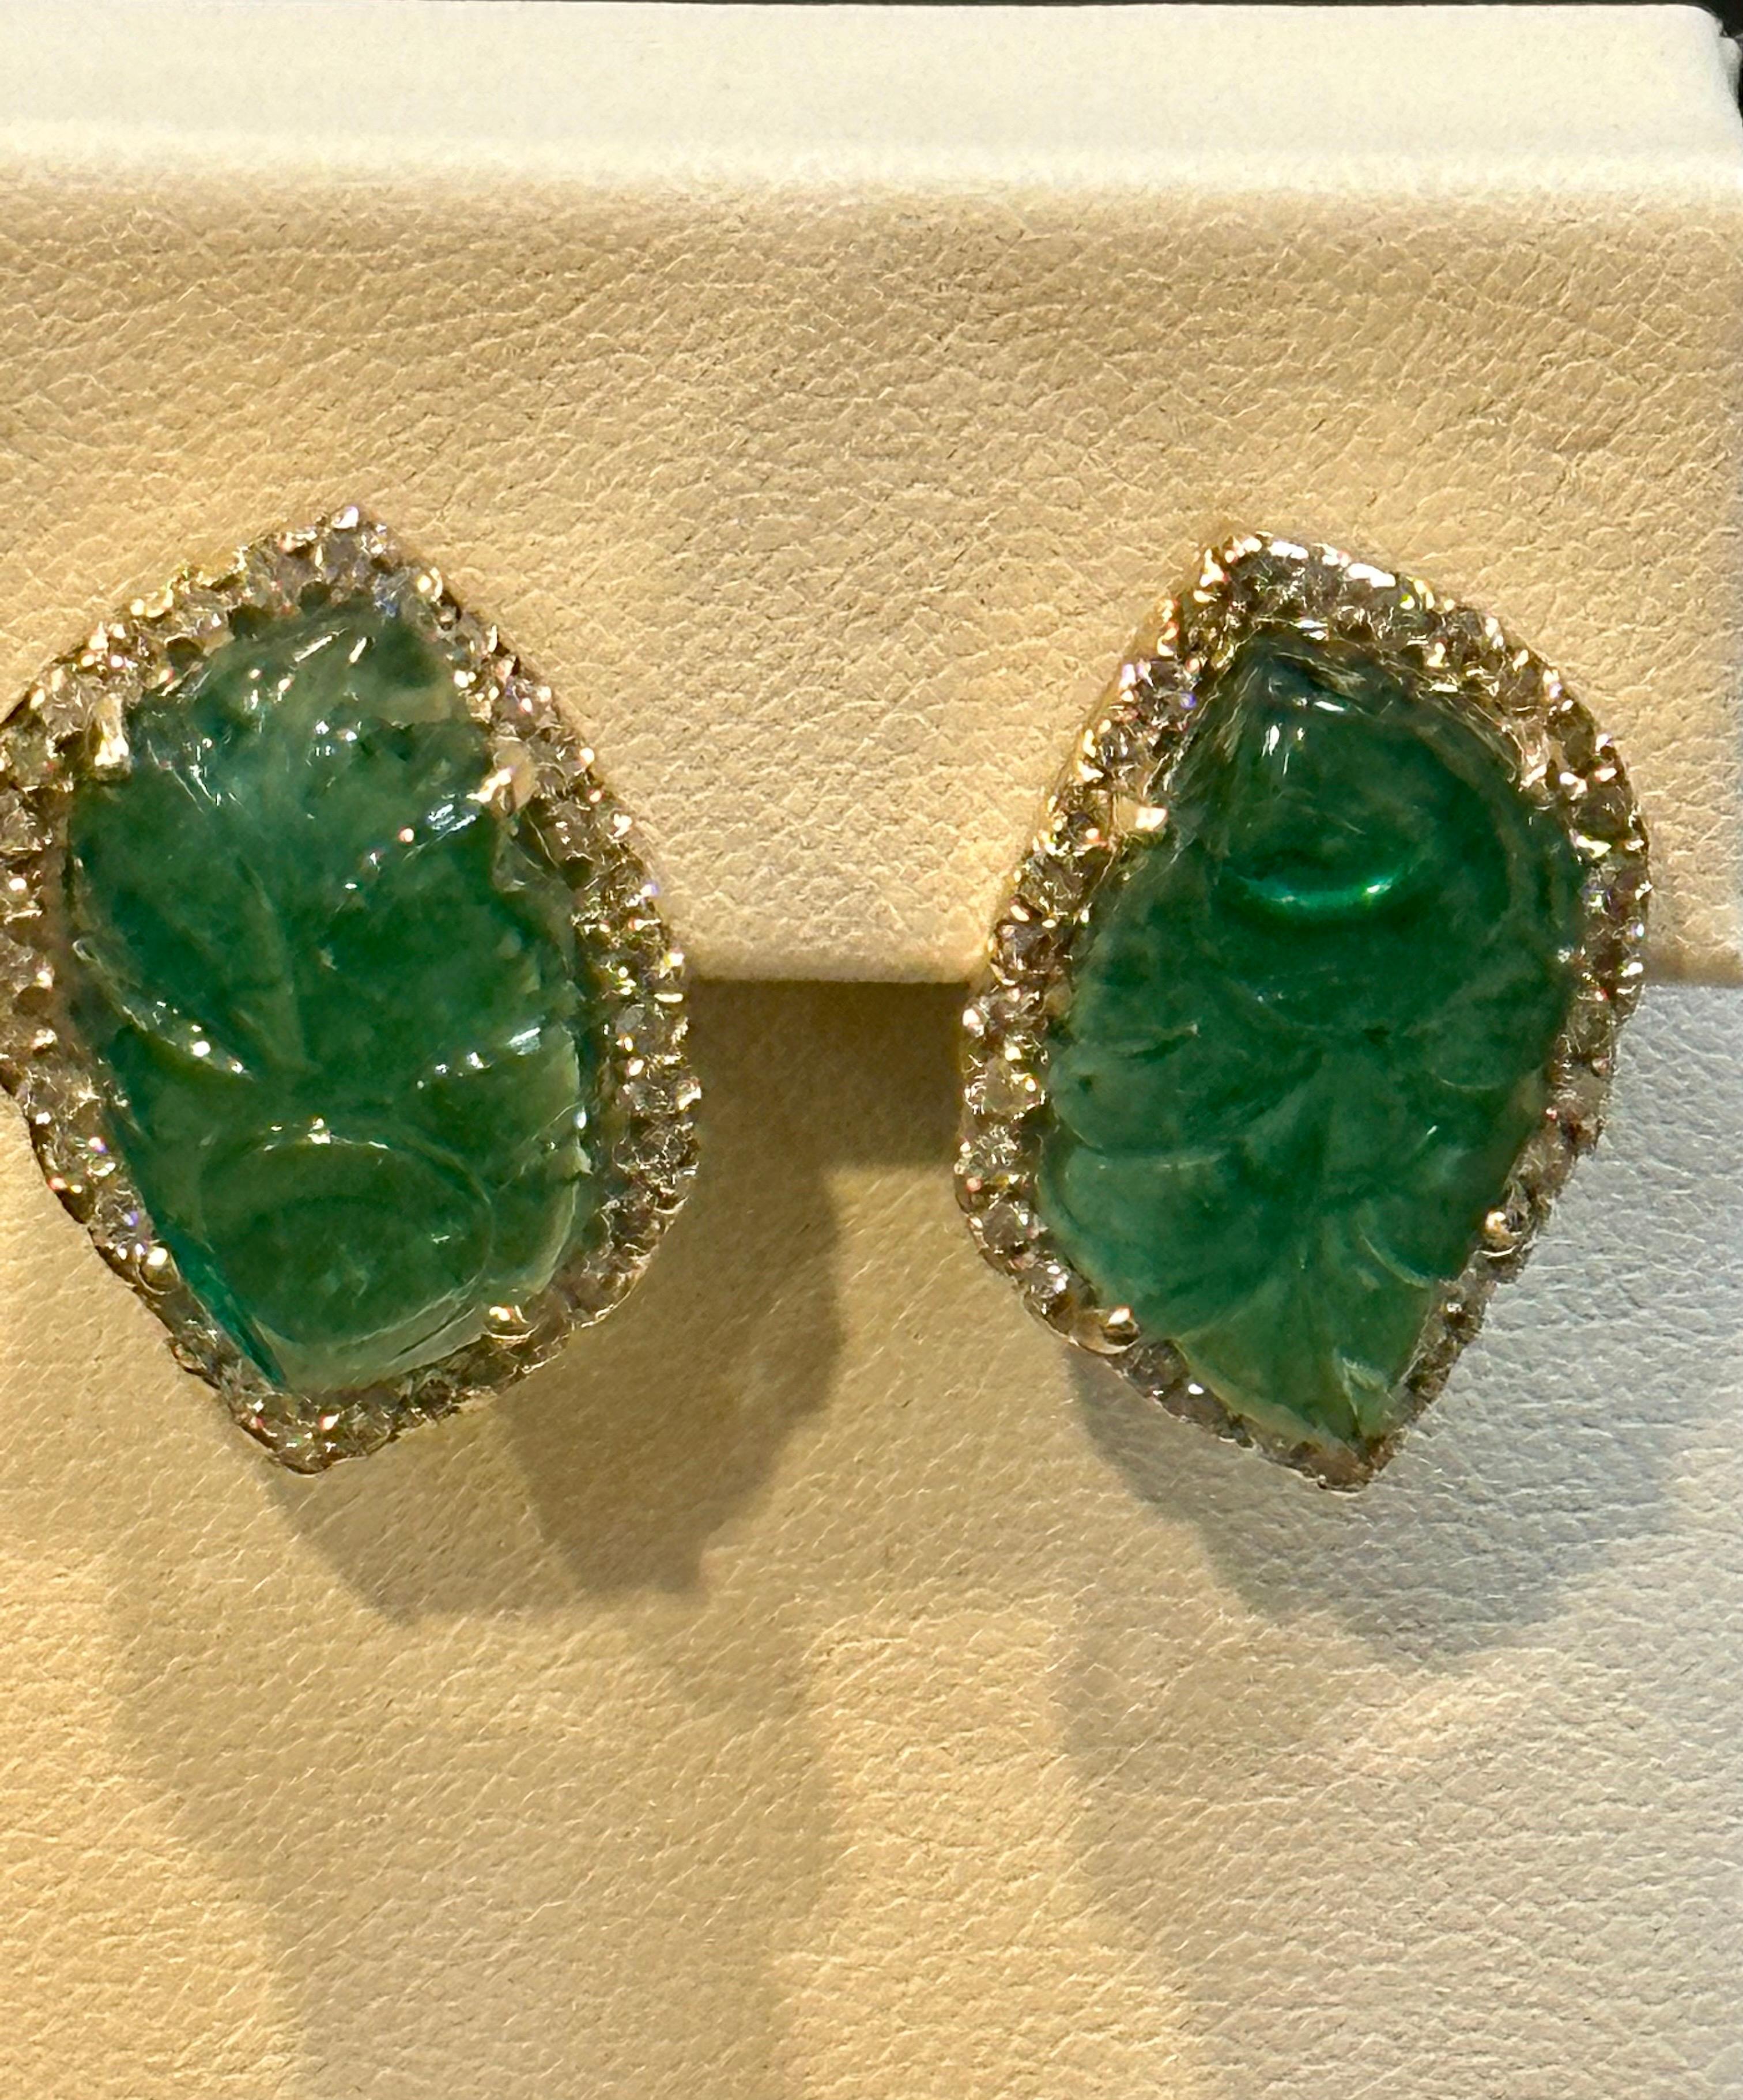 22 Ct Carved Emerald & 2 Ct Diamond Earrings 14 Karat Yellow Gold Post Earrings In Excellent Condition For Sale In New York, NY